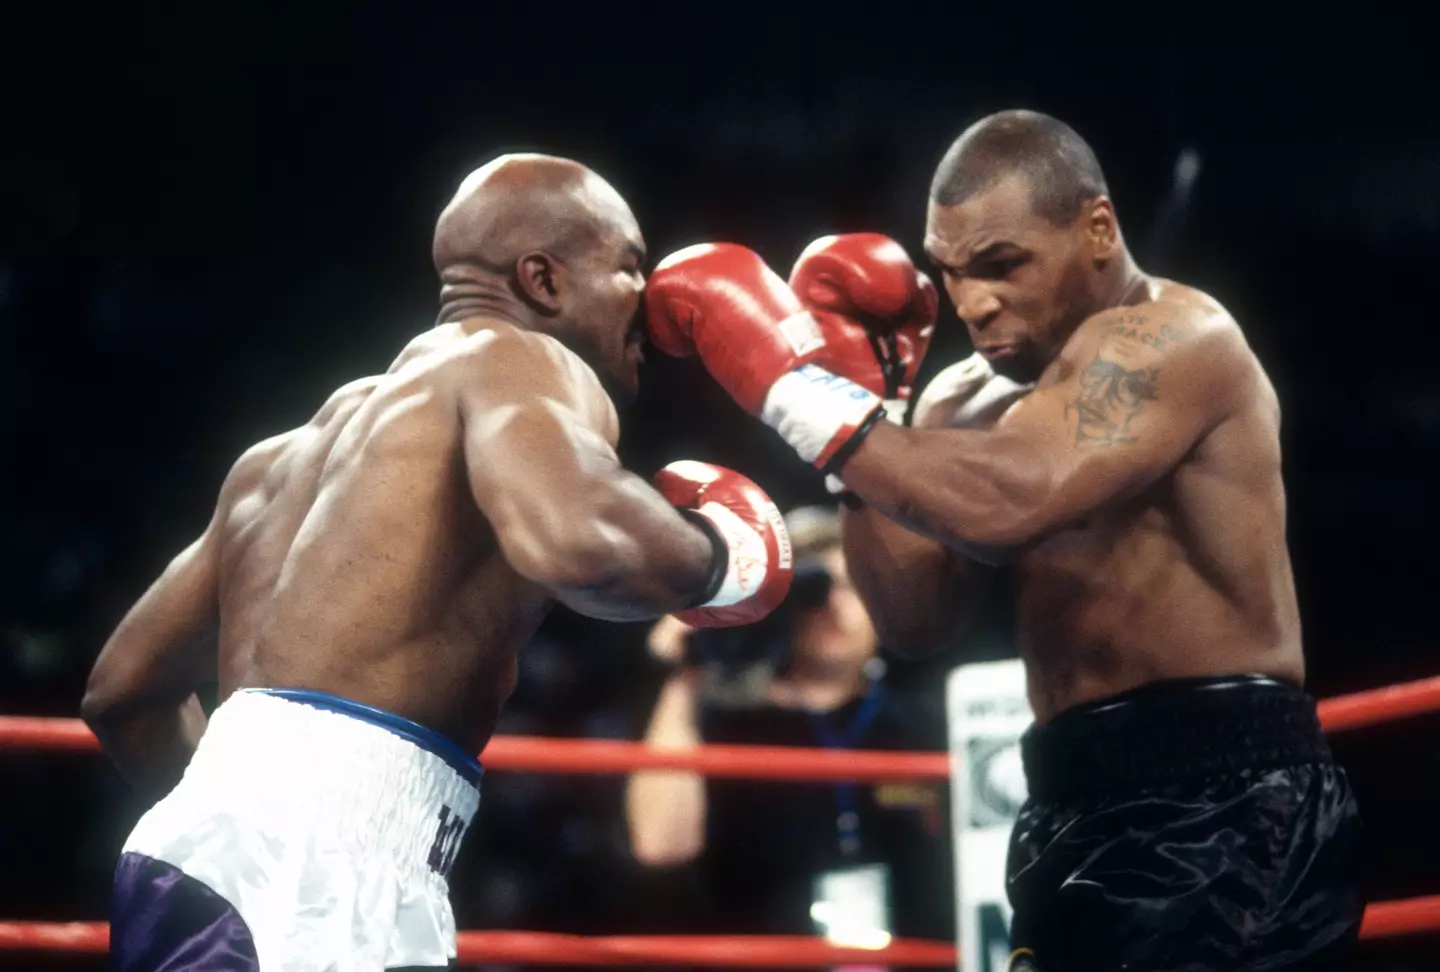 Mike Tyson named Evander Holyfield as his toughest opponent. (